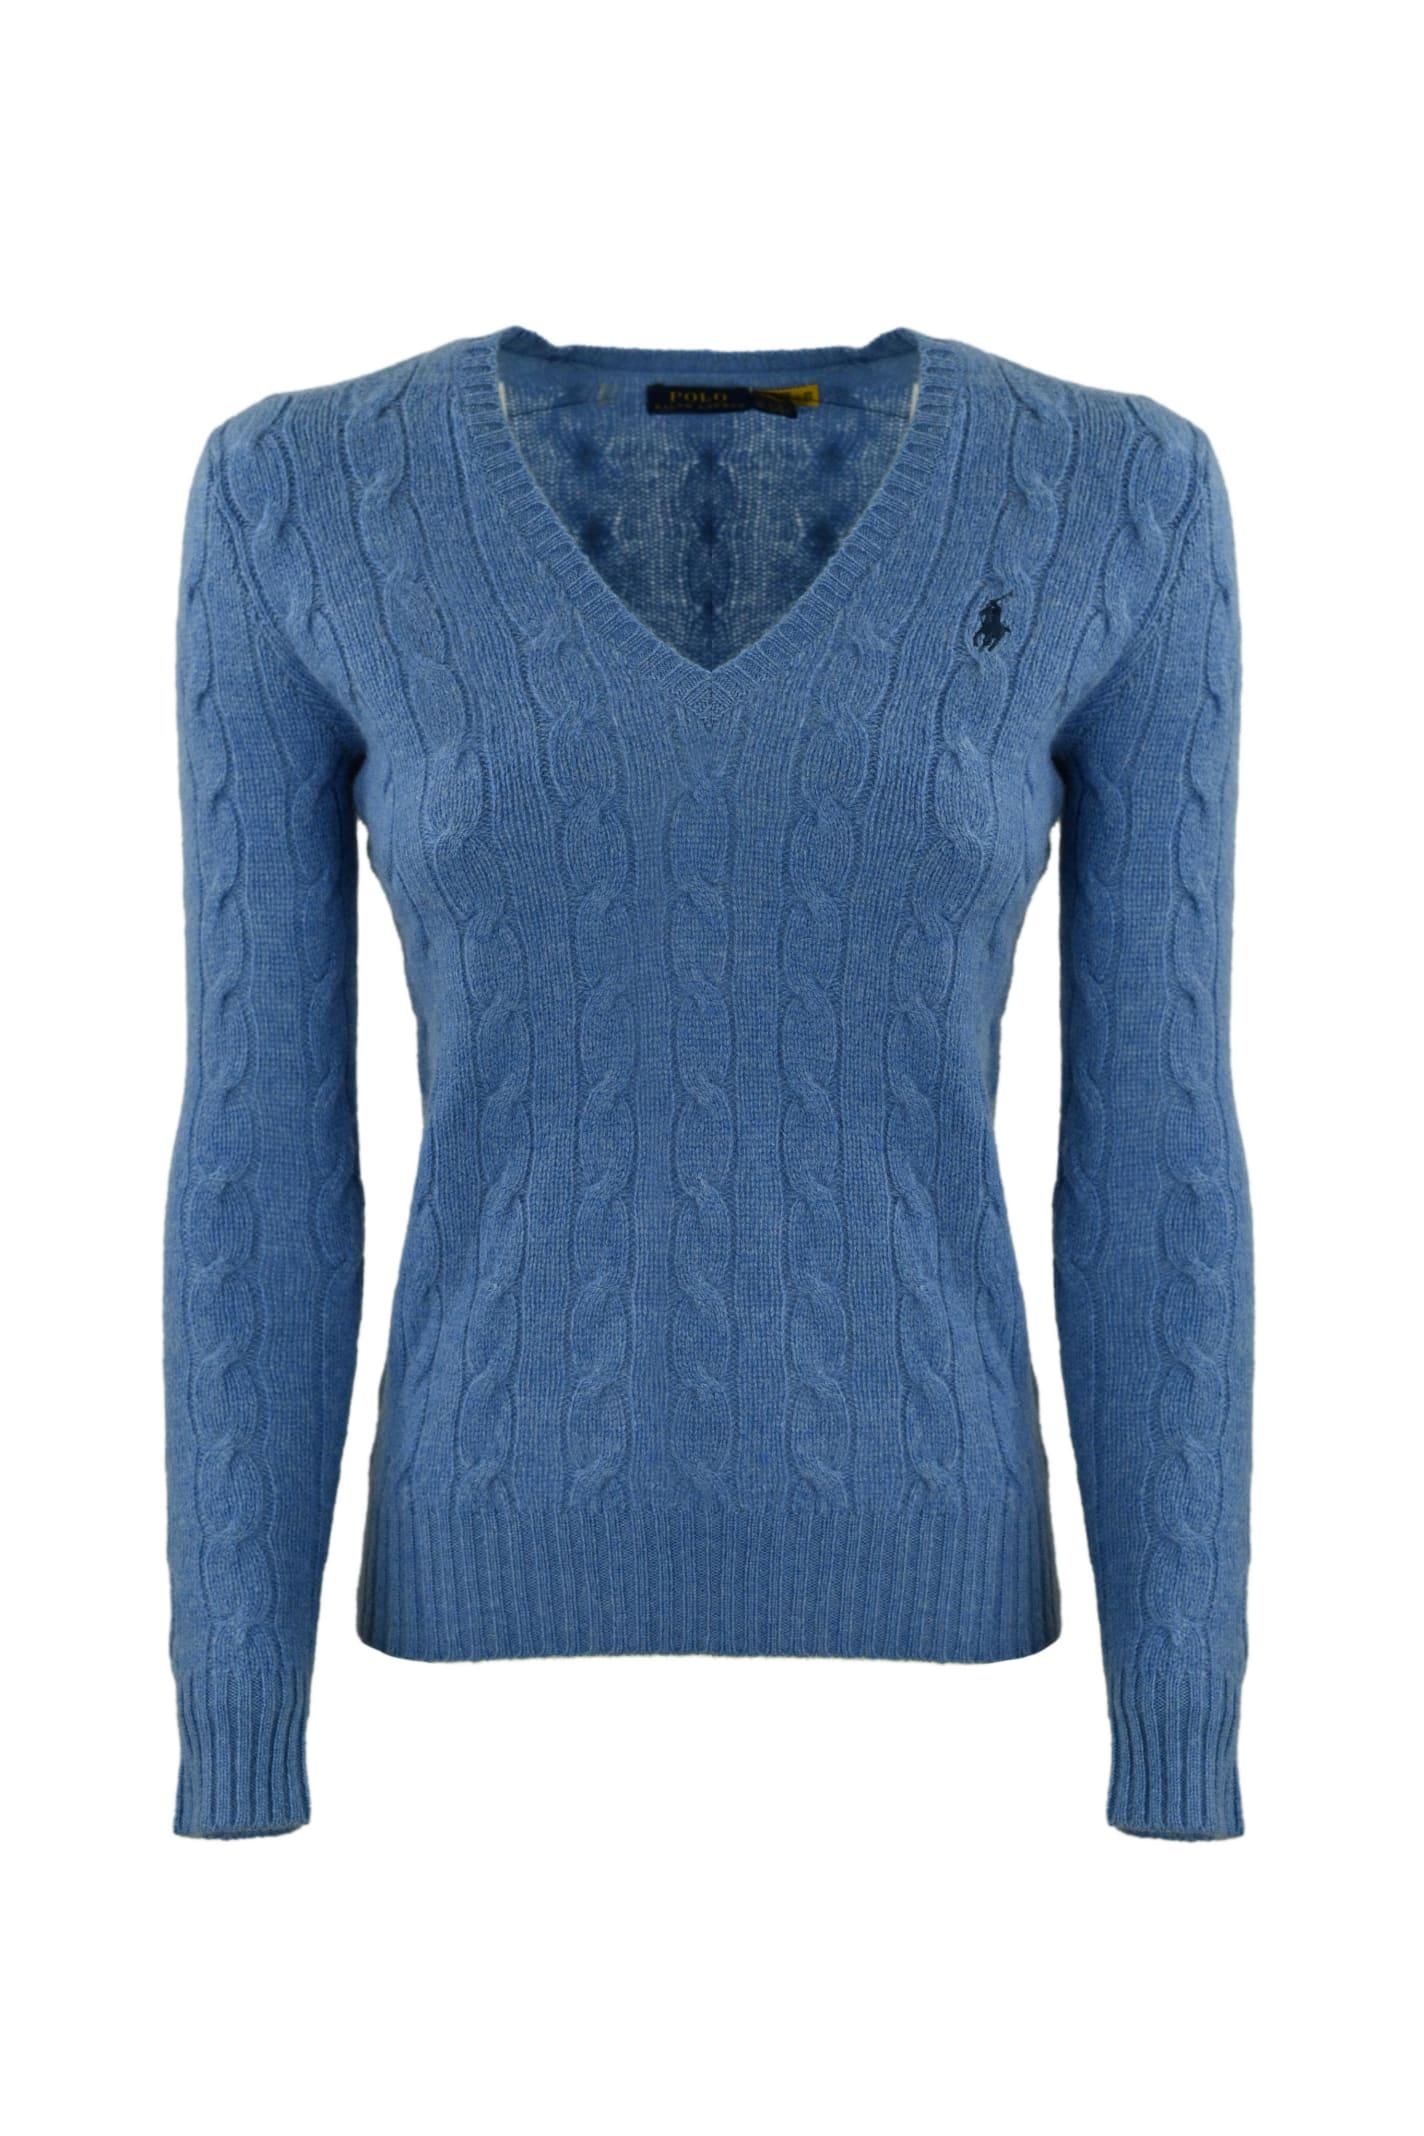 Polo Ralph Lauren Kimberly Sweater in Blue | Lyst